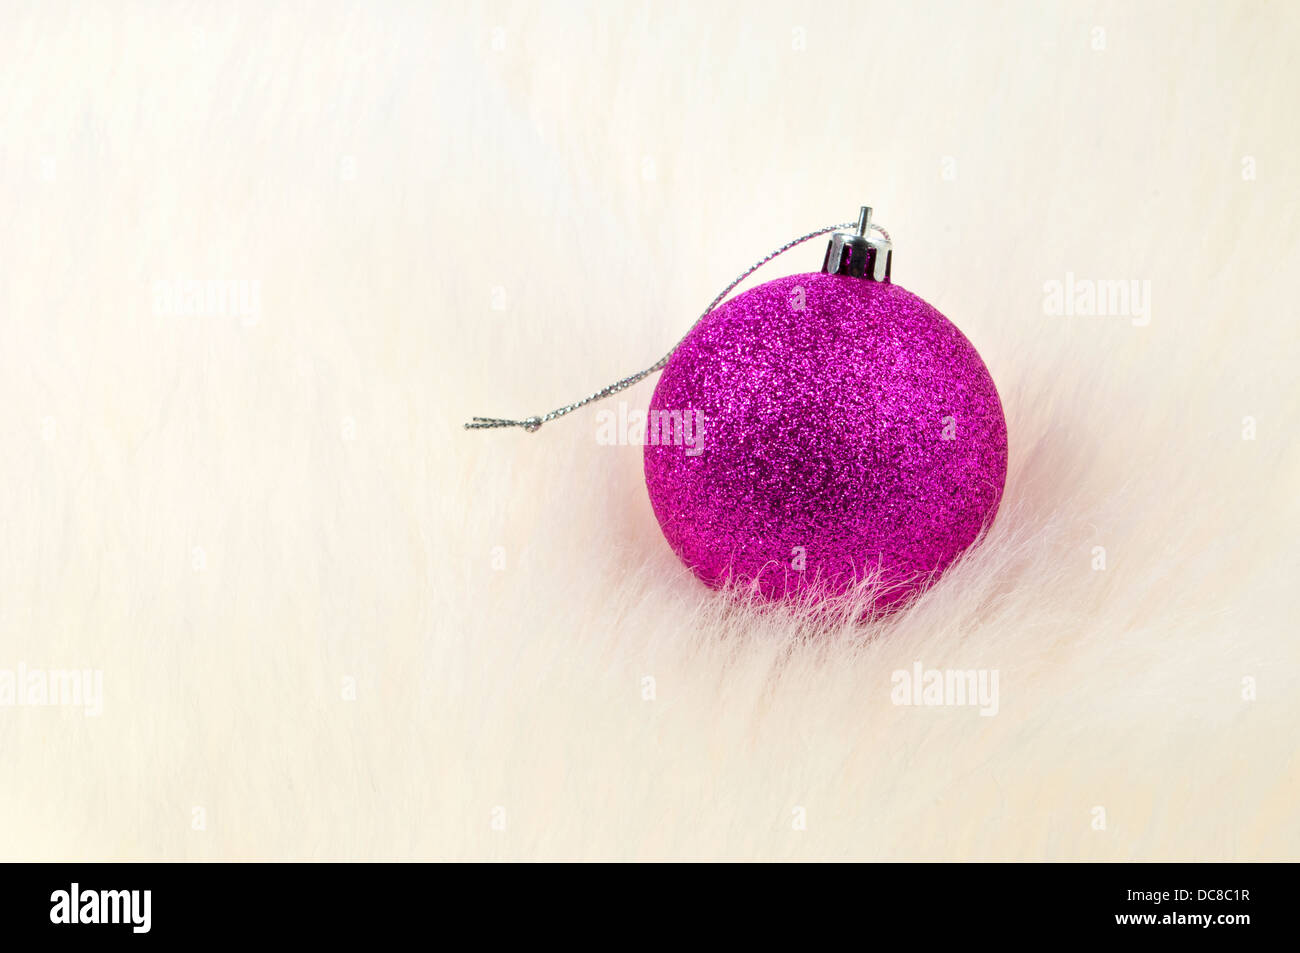 Christmas decoration - Single bauble on top of fur Stock Photo